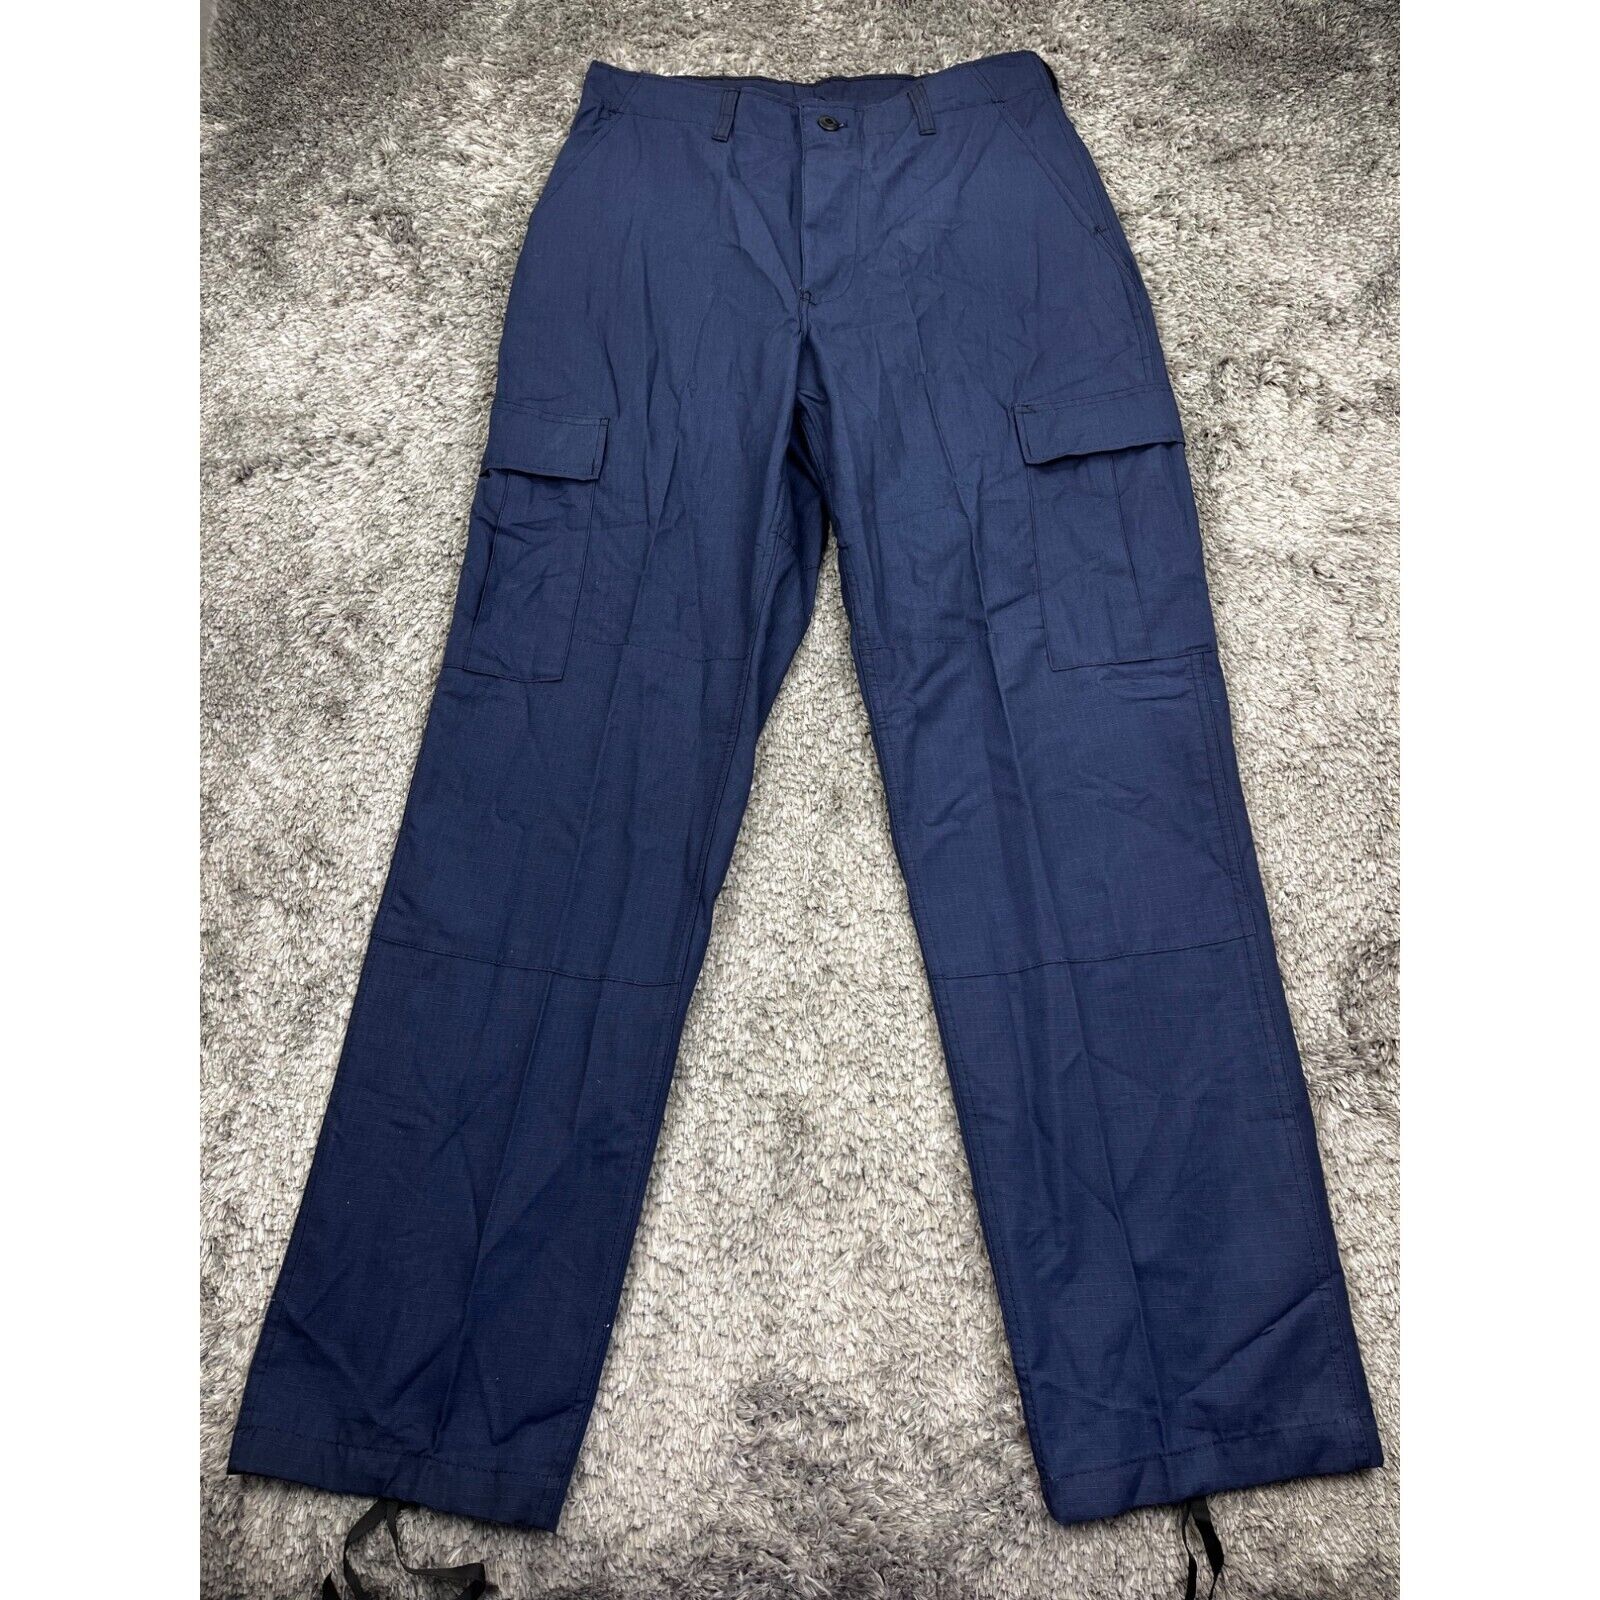 Military Combat Trousers Mens Medium Long Navy Button Fly Tastical Cargo Pants